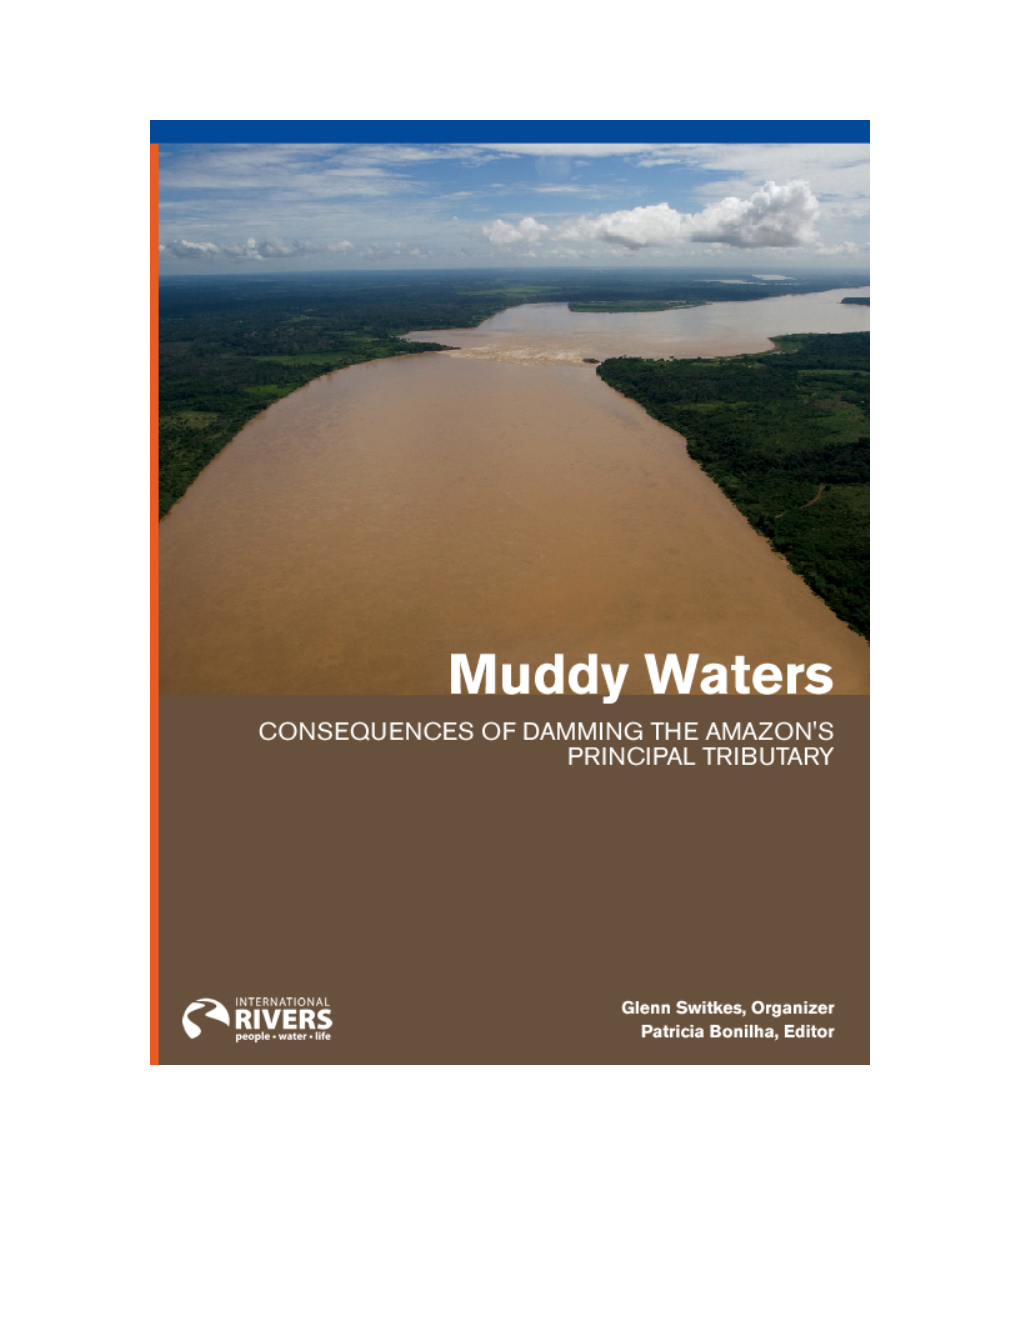 International Rivers on the Madeira River Dams